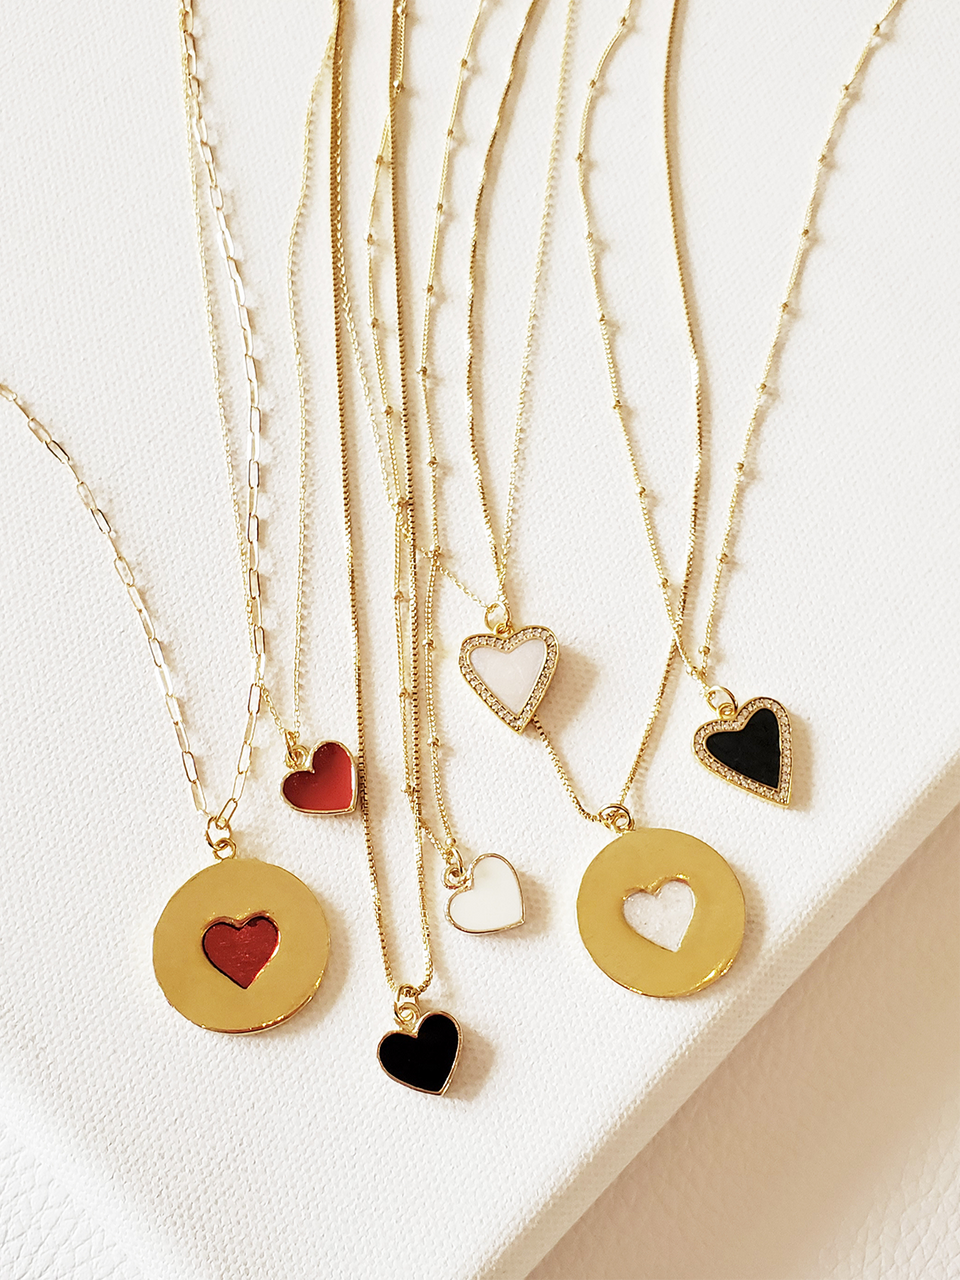 Louis Vuitton Gold Tone Love Letters Timeless Layered Necklace